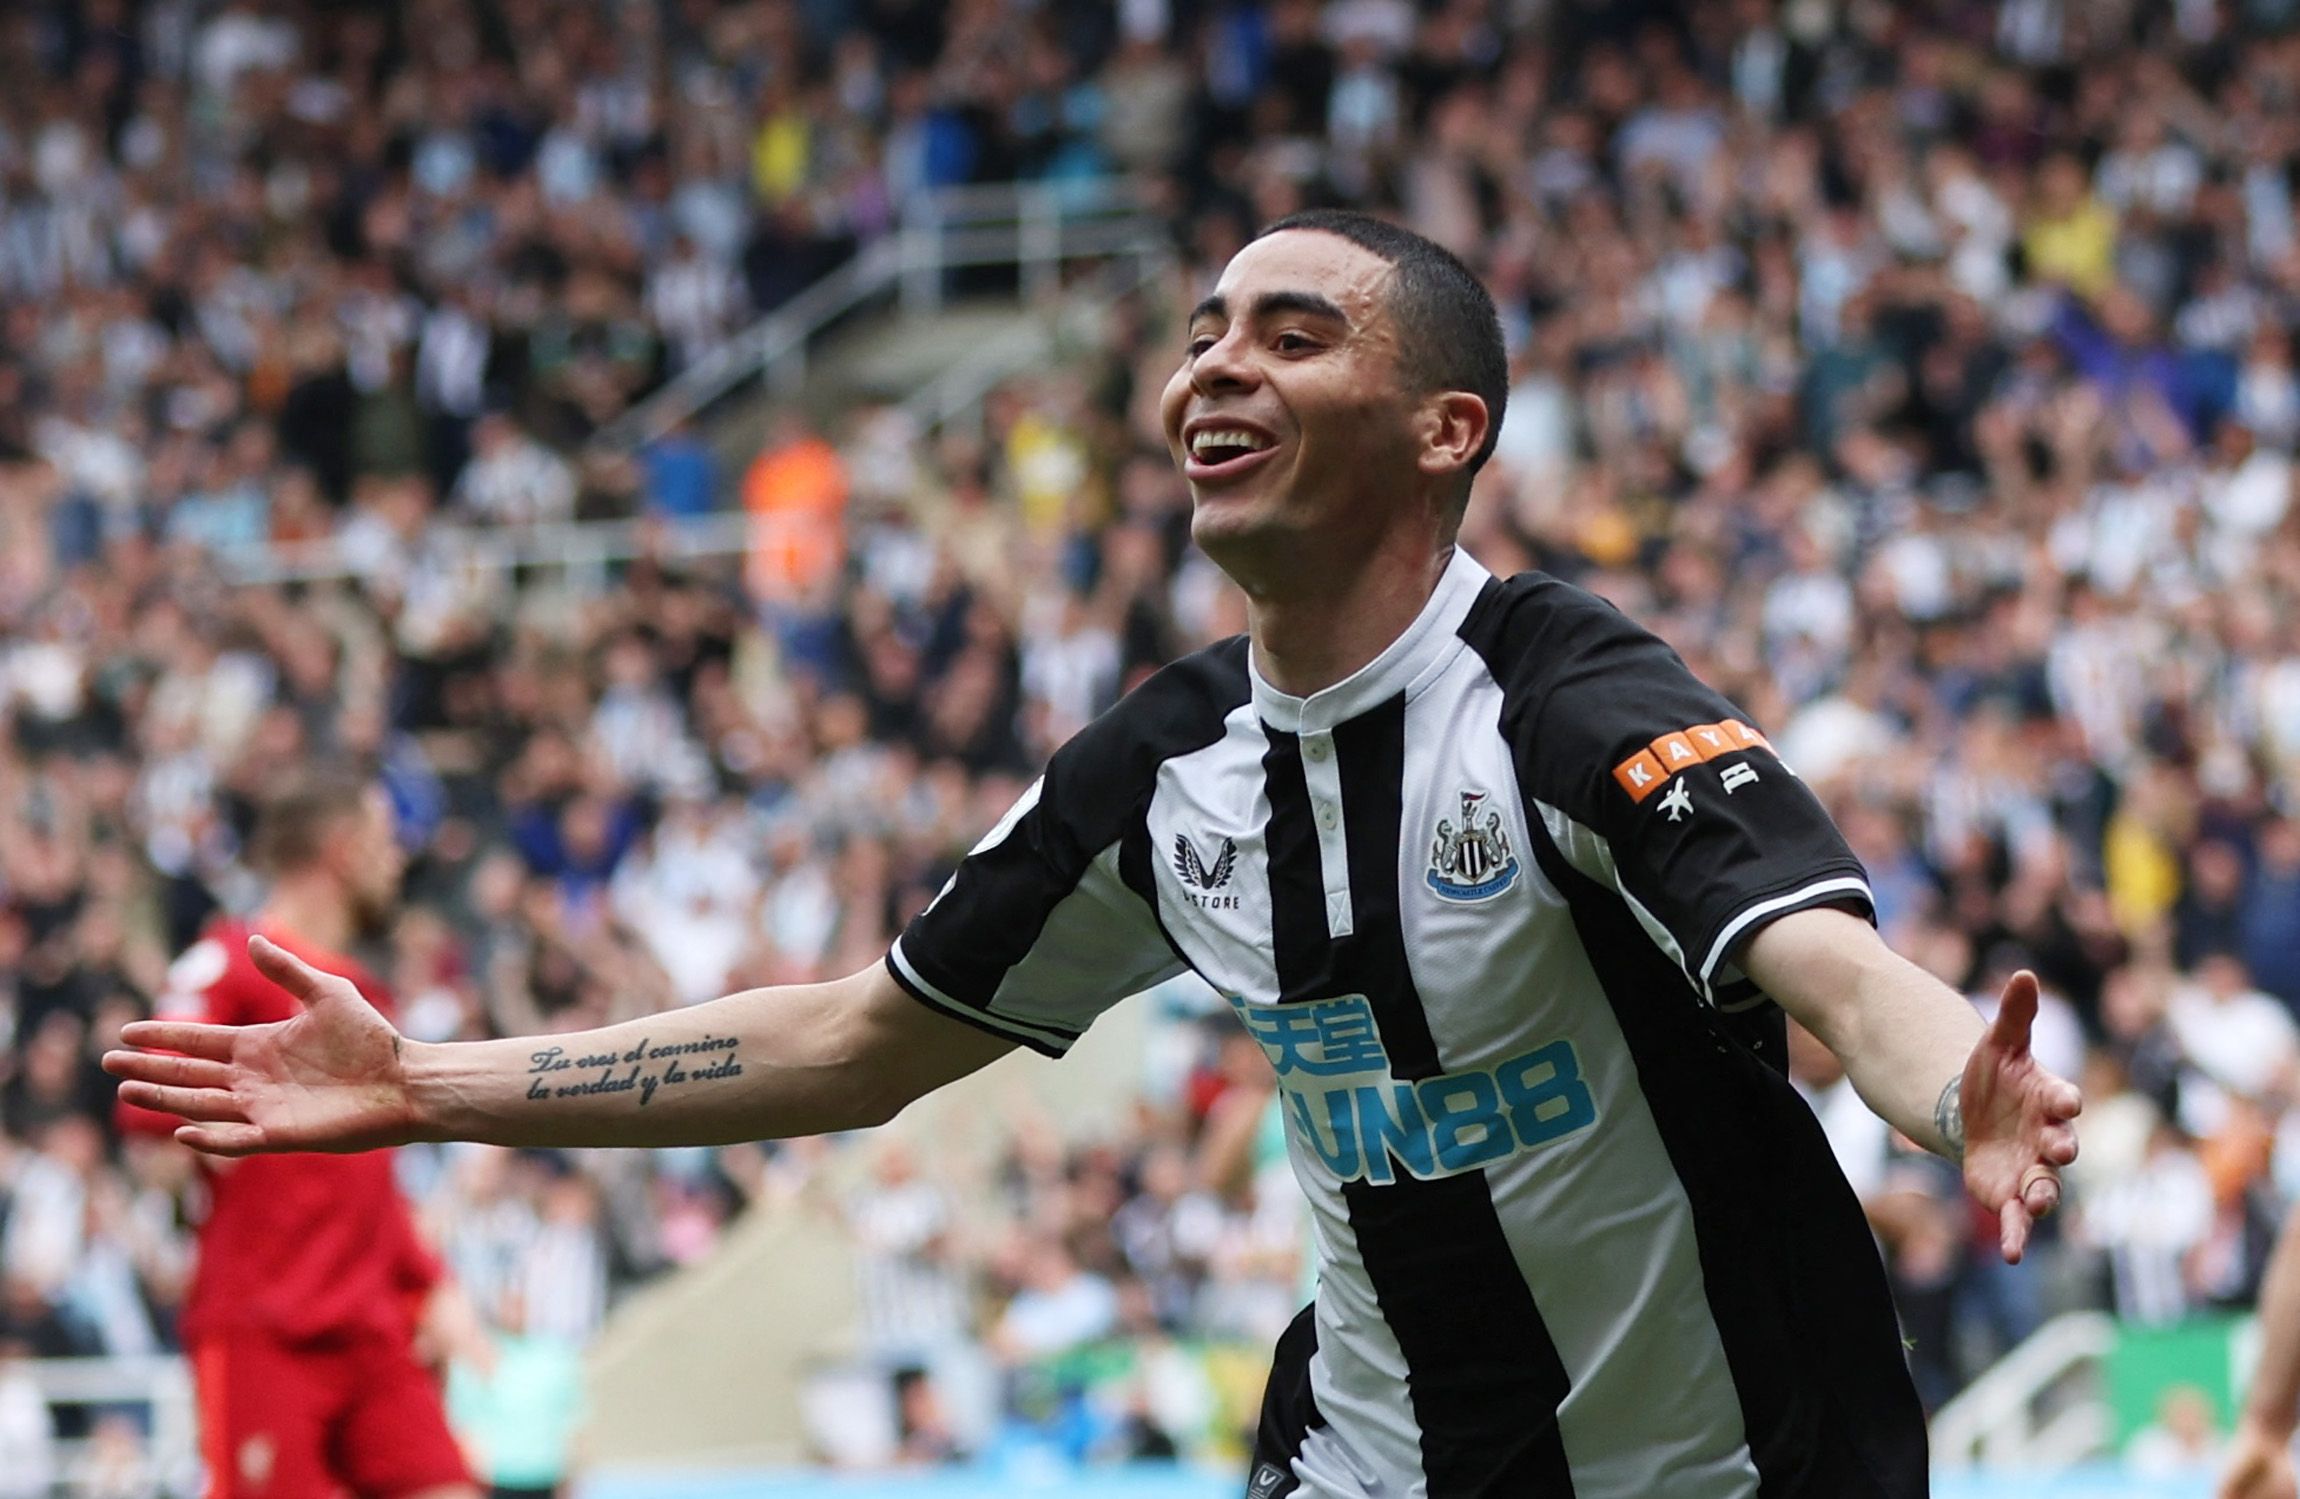 Soccer Football - Premier League - Newcastle United v Liverpool - St James' Park, Newcastle, Britain - April 30, 2022 Newcastle United's Miguel Almiron celebrates scoring a disallowed goal Action Images via Reuters/Lee Smith EDITORIAL USE ONLY. No use with unauthorized audio, video, data, fixture lists, club/league logos or 'live' services. Online in-match use limited to 75 images, no video emulation. No use in betting, games or single club /league/player publications.  Please contact your accou